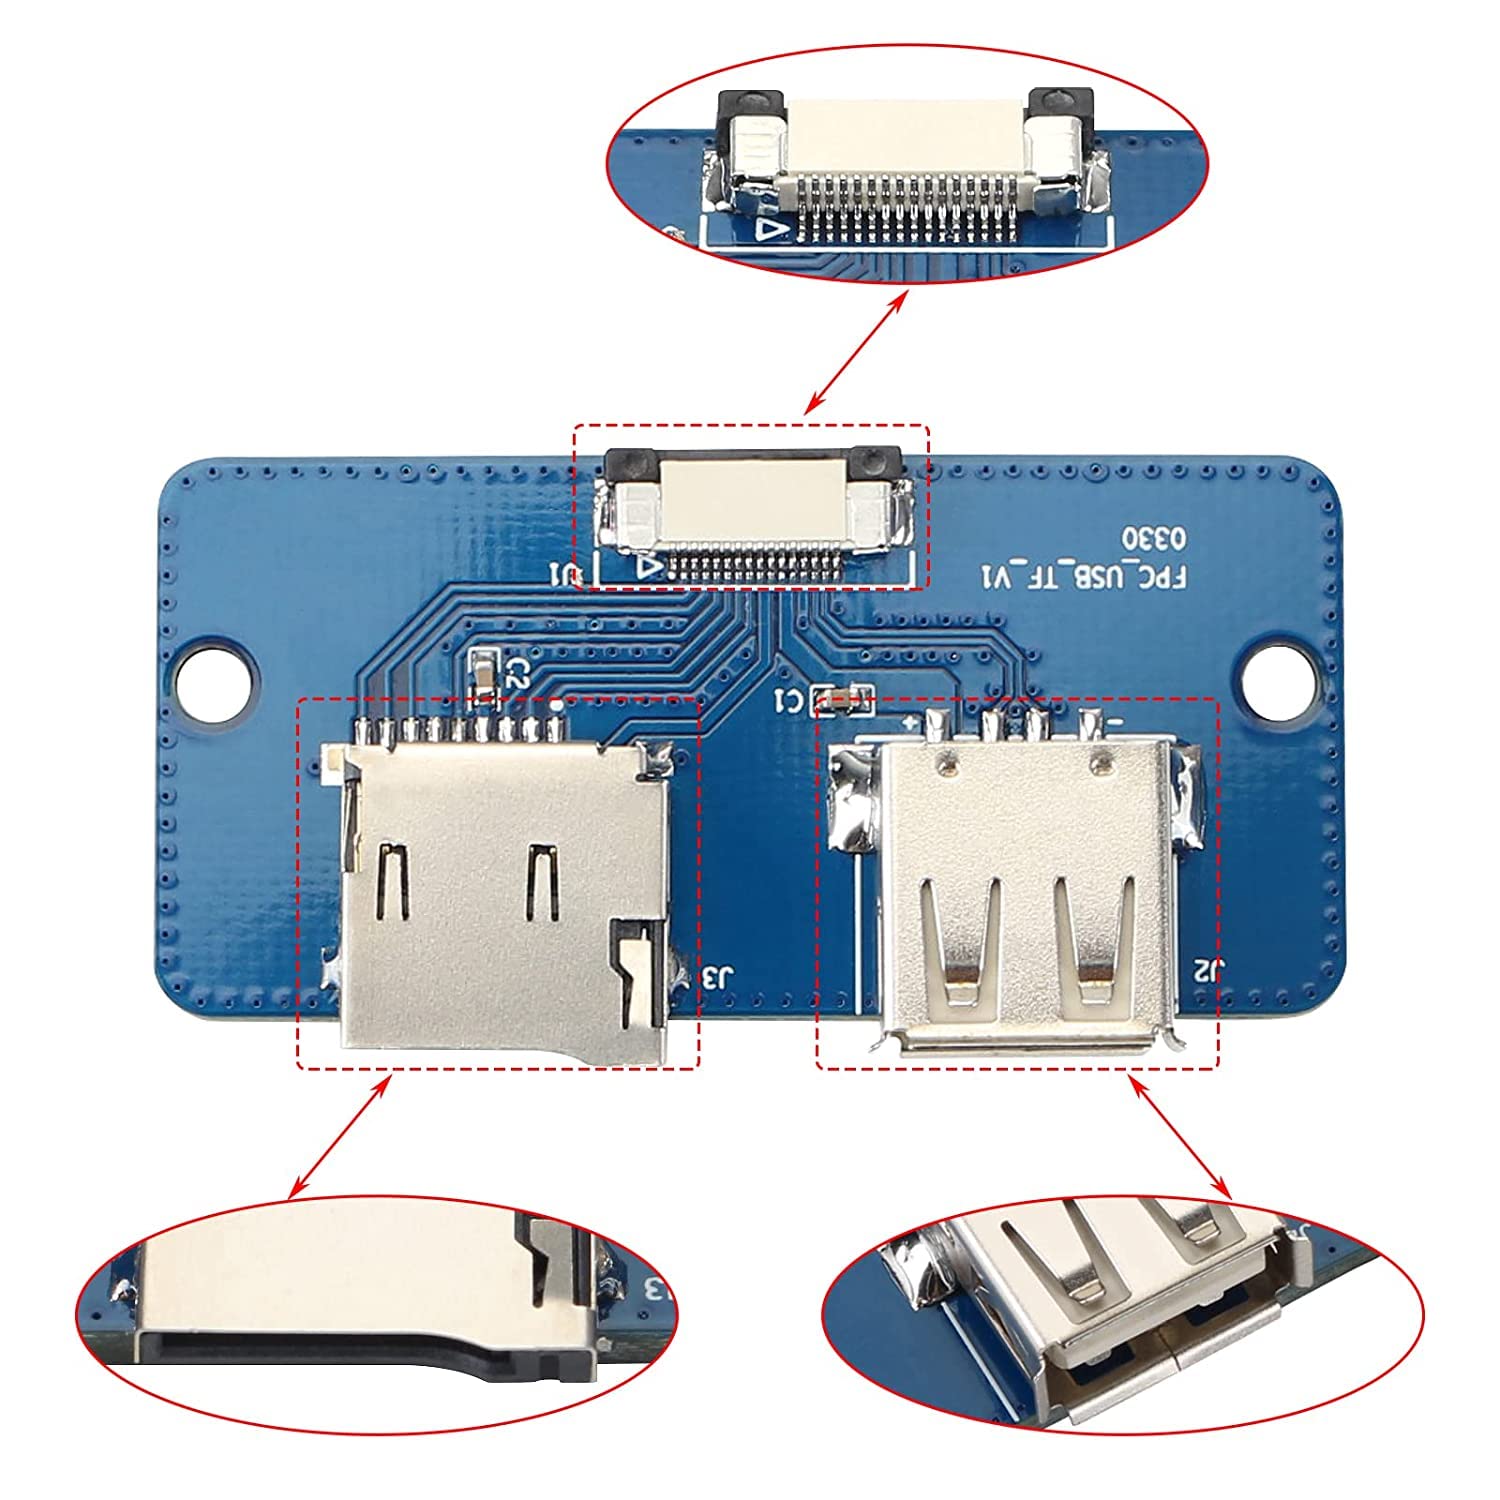 USB Adapter Board for Connecting LCD Screen to Motherboard - Sidewinder X1/Genius